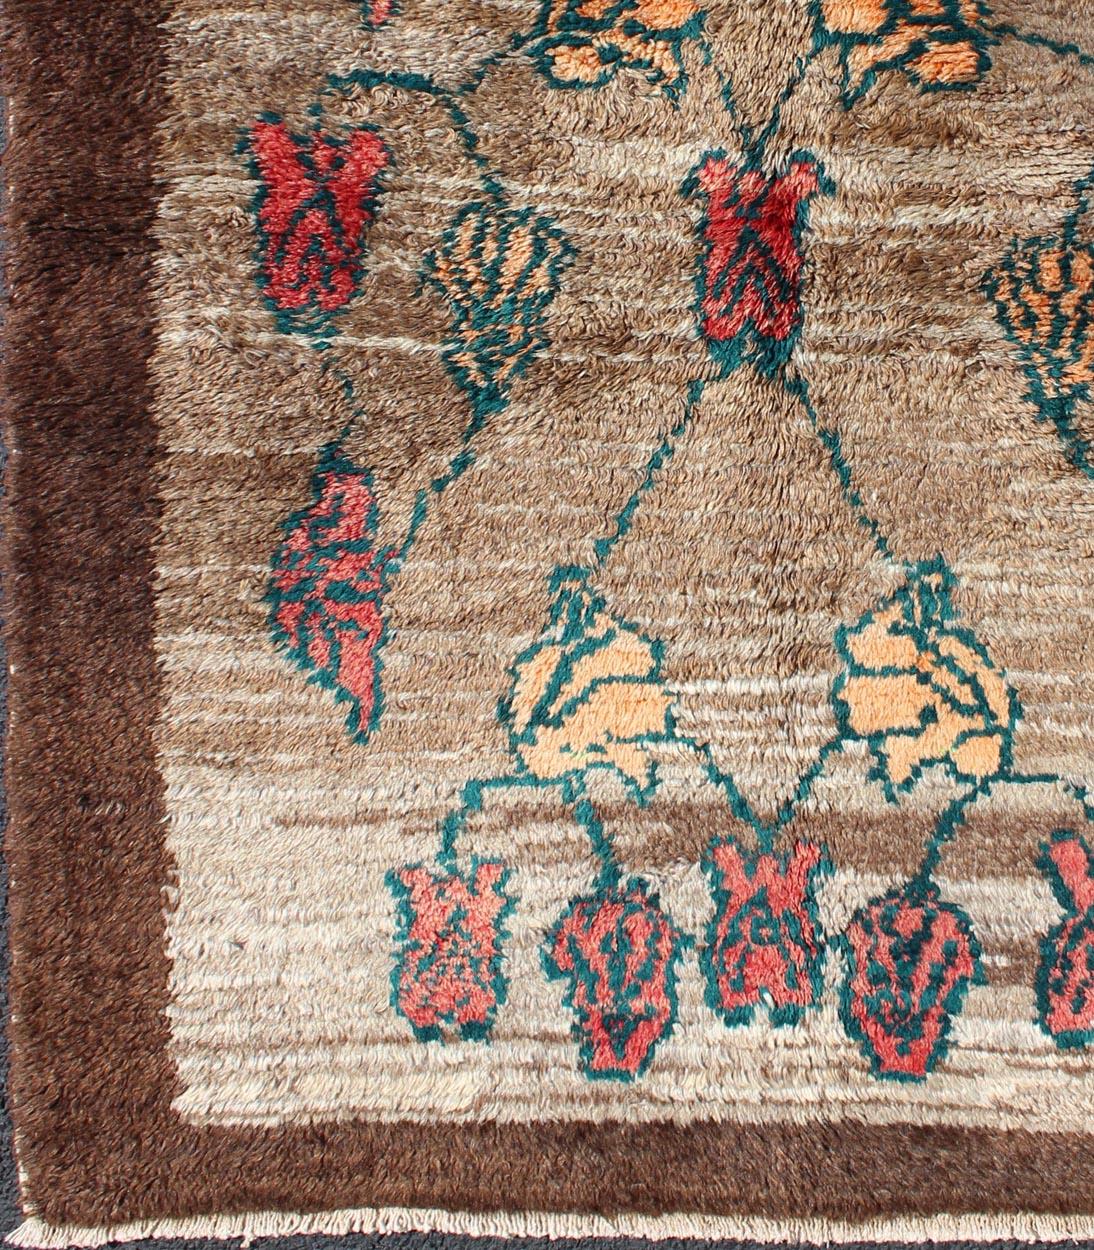 Vintage Tulu rug with Camel Color Field and Flowers Surrounded by Brown Border

Measures: 3'8 x 4'7

Made with very fine angora blend wool, this Turkish Tulu has Camel Color Field Surrounded by a Chocolate Border. Keivan Woven Arts rug/EN-112452  